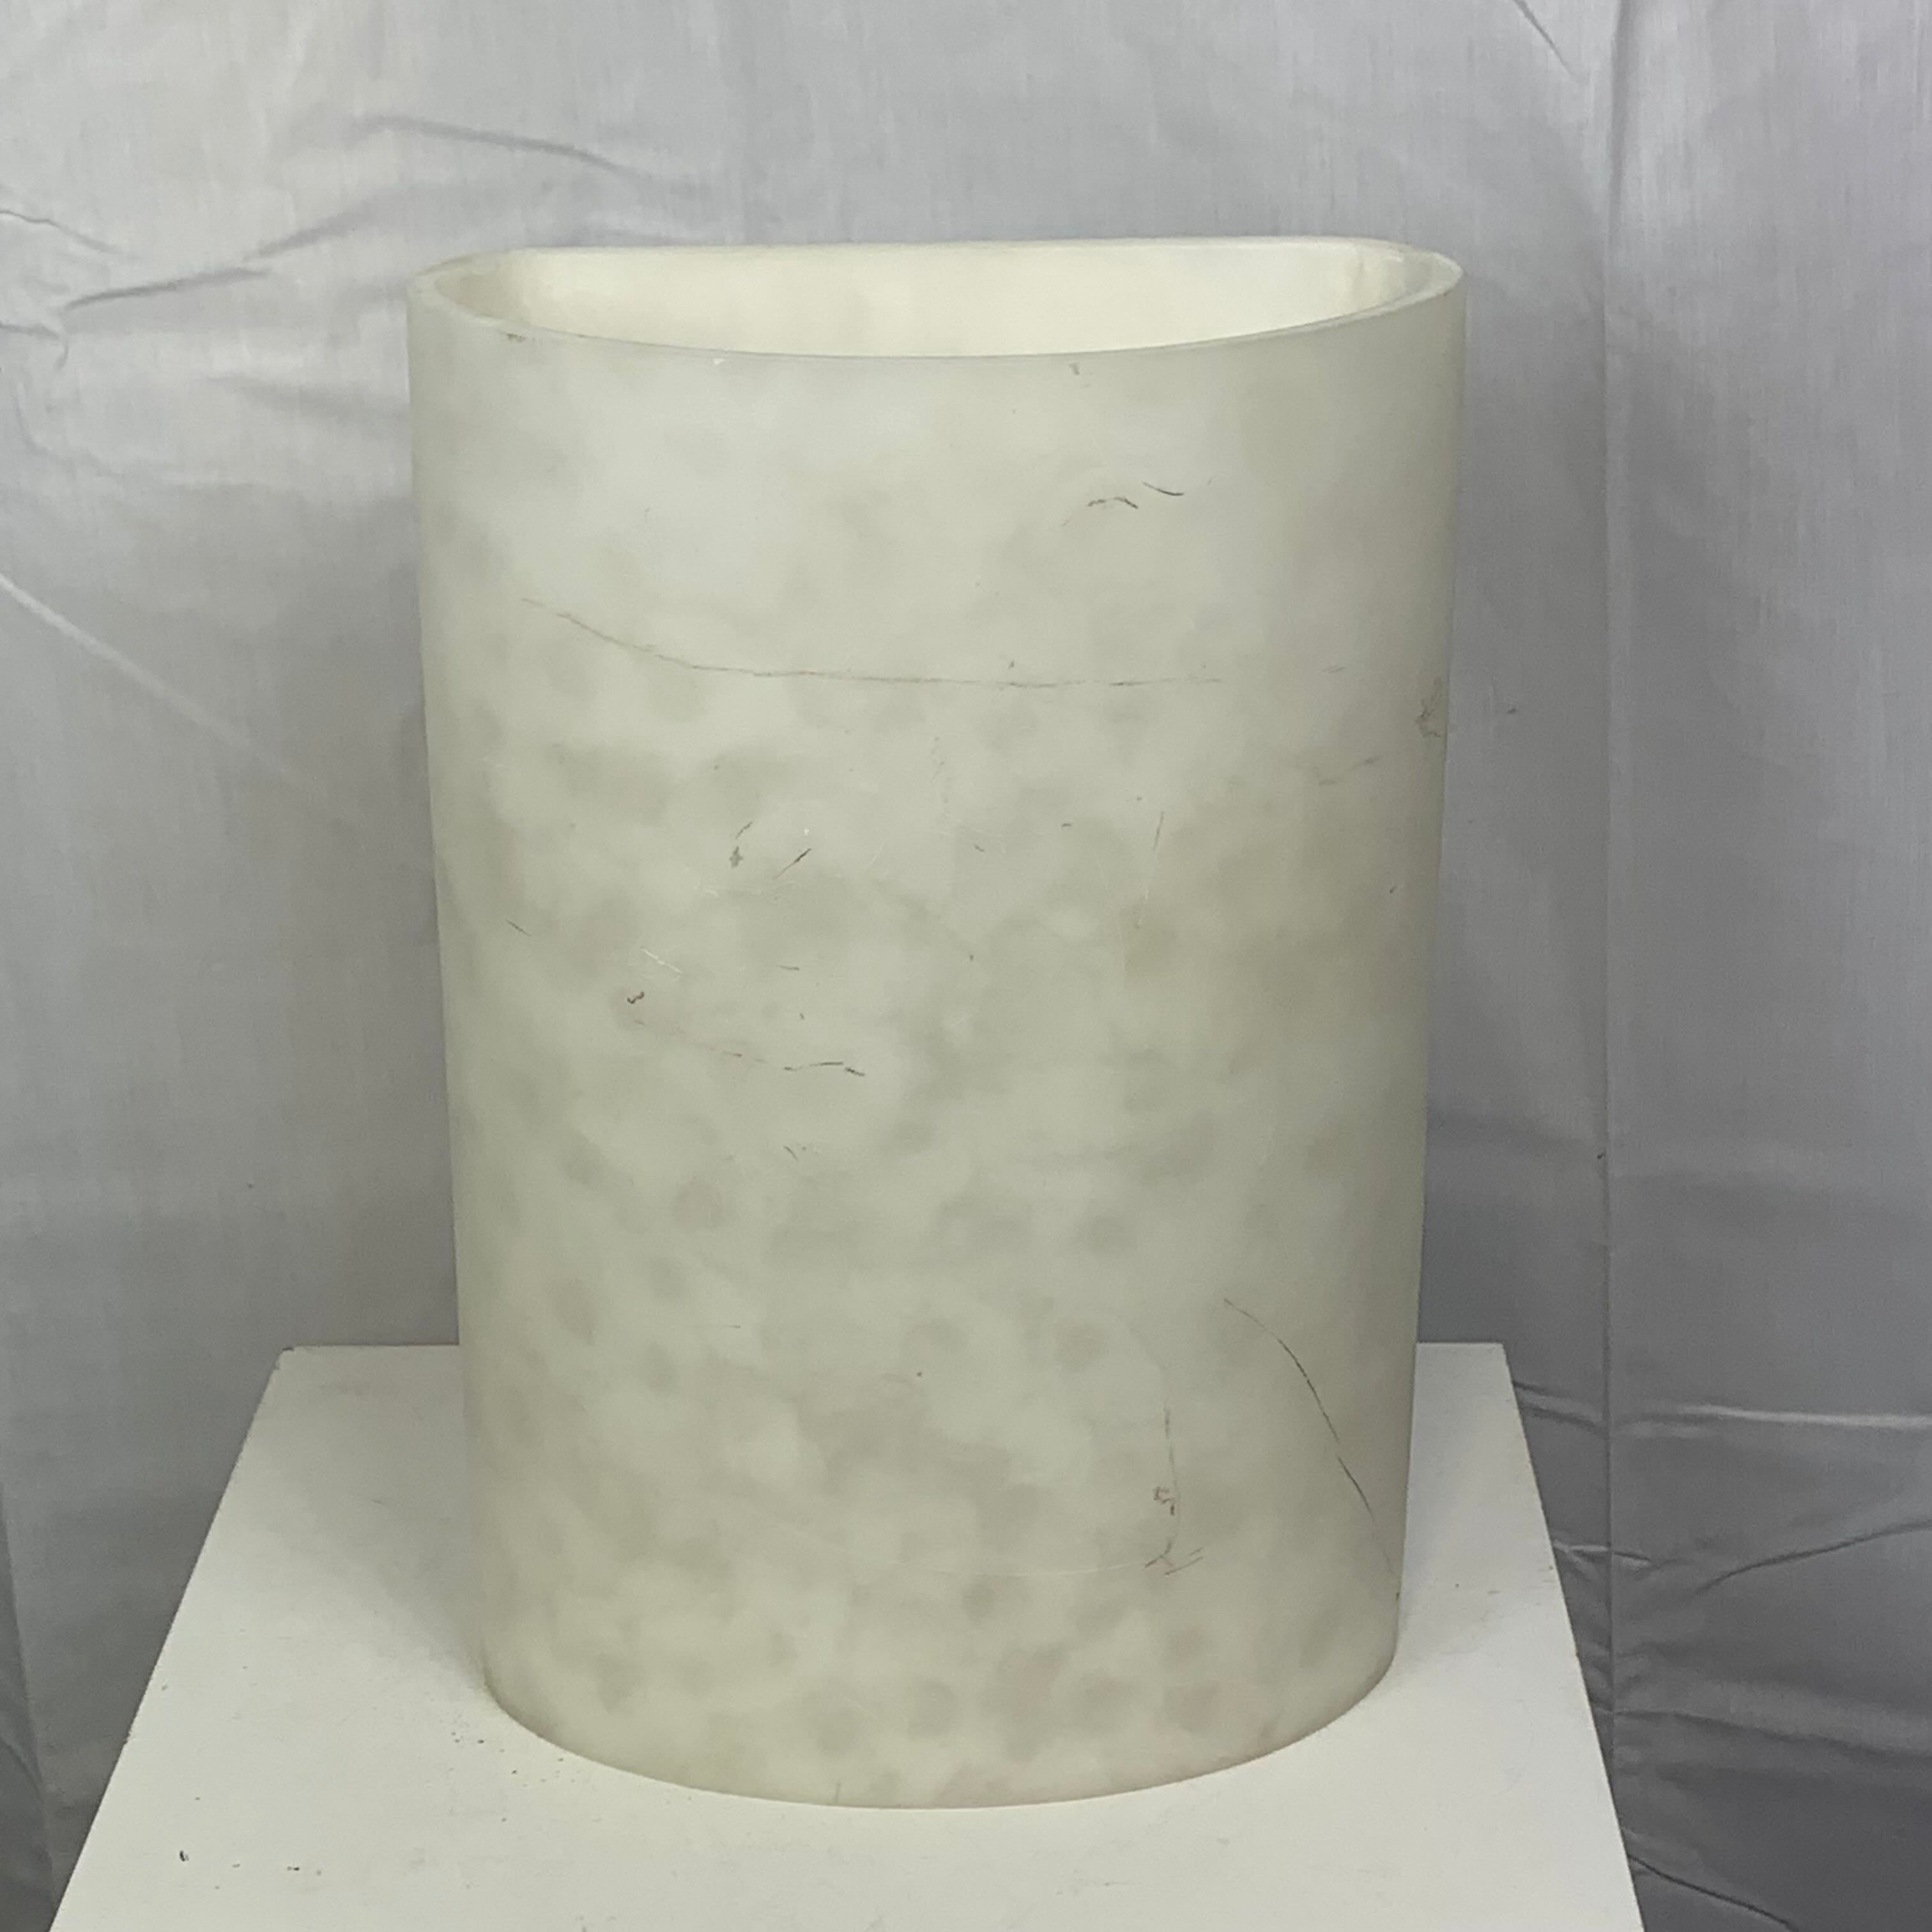 8"x 4"x 12" Justice Design Group White Plastic Cylinder 2 Light Wall Sconce